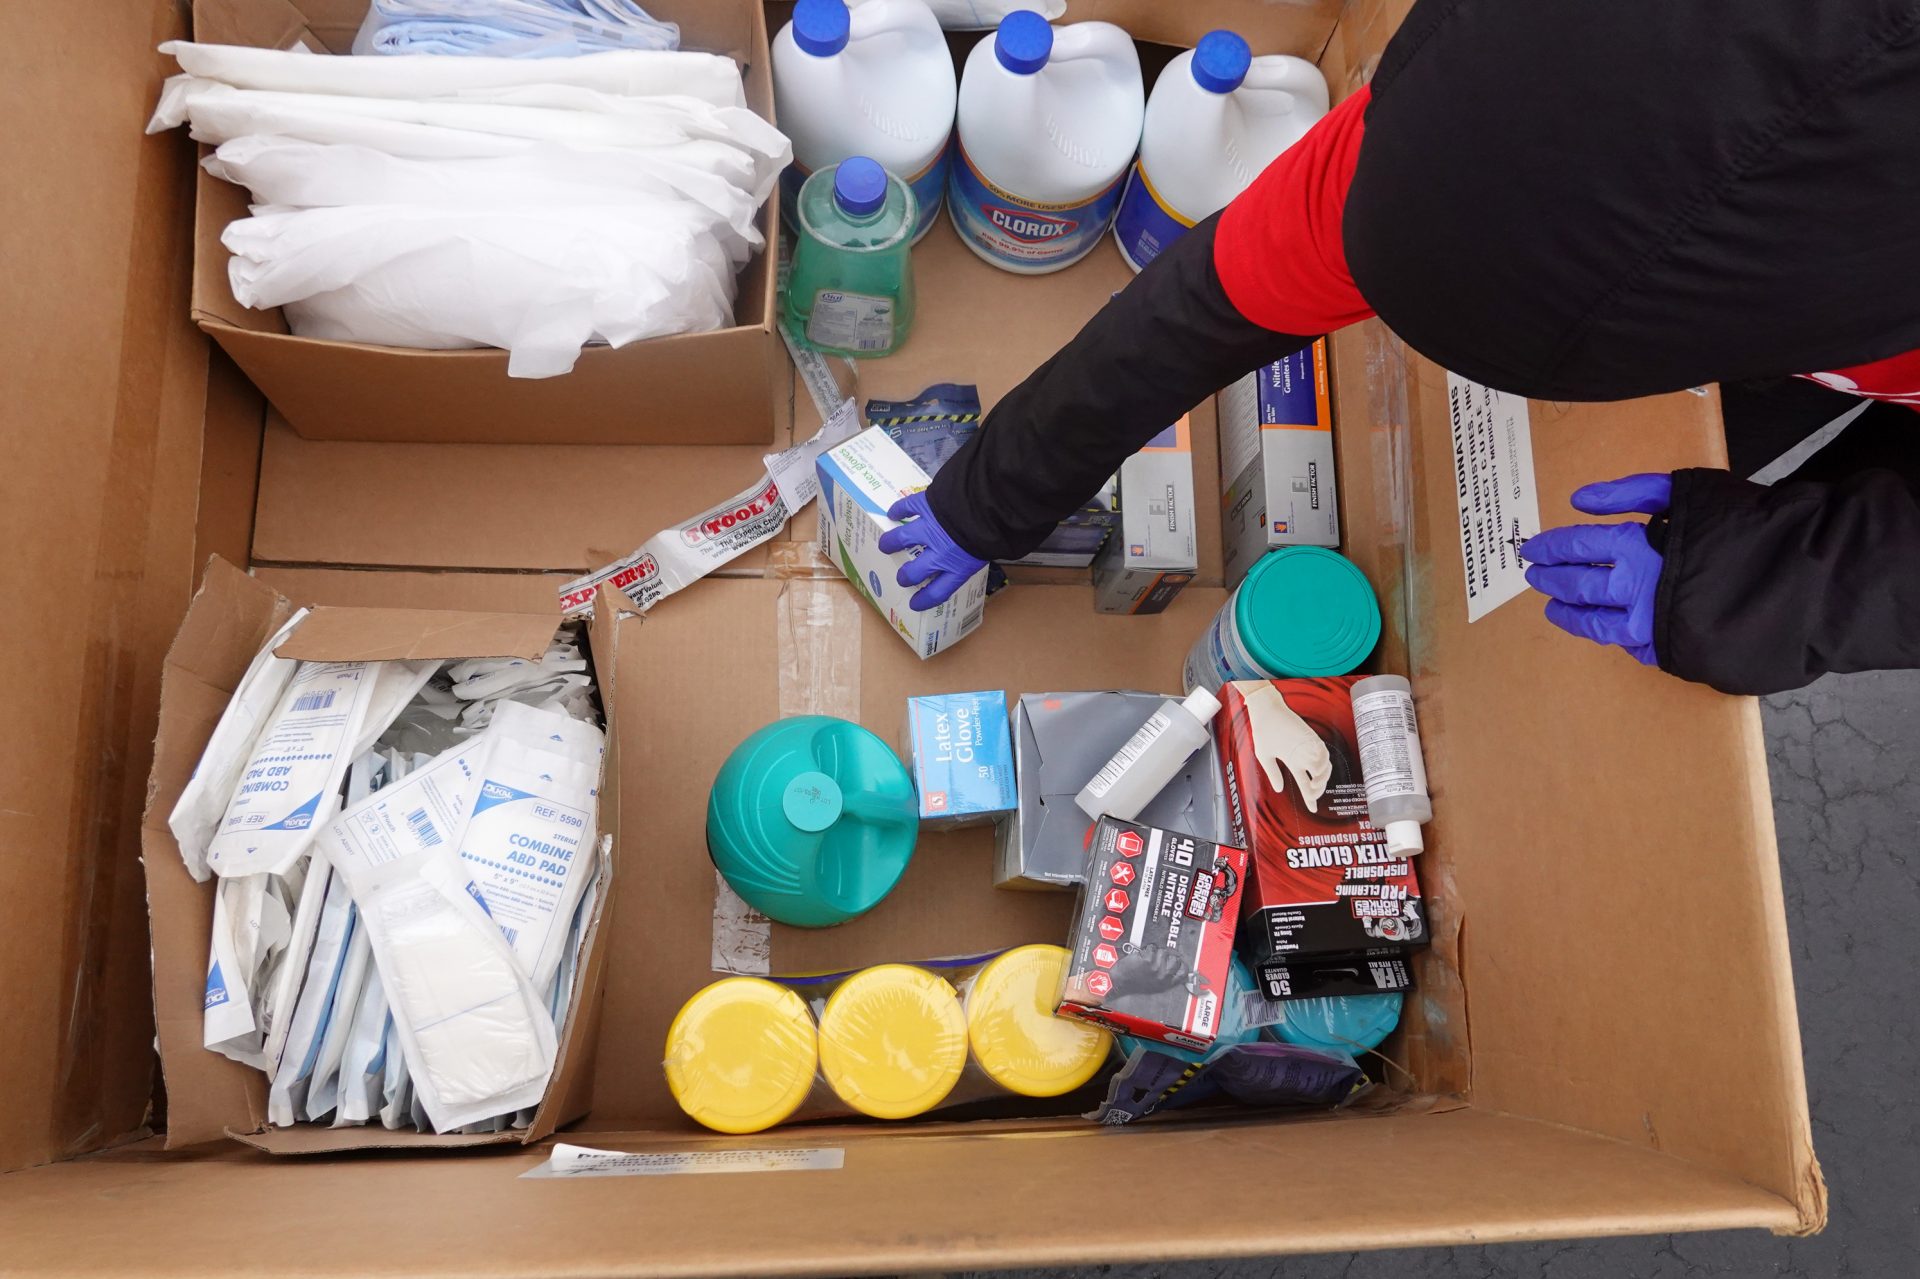 Staff and volunteers with Project CURE held a drive outside the United Center in Chicago to collect donations of PPE from the community which were then used to supply hospitals and clinics experiencing shortages on March 29, 2020.